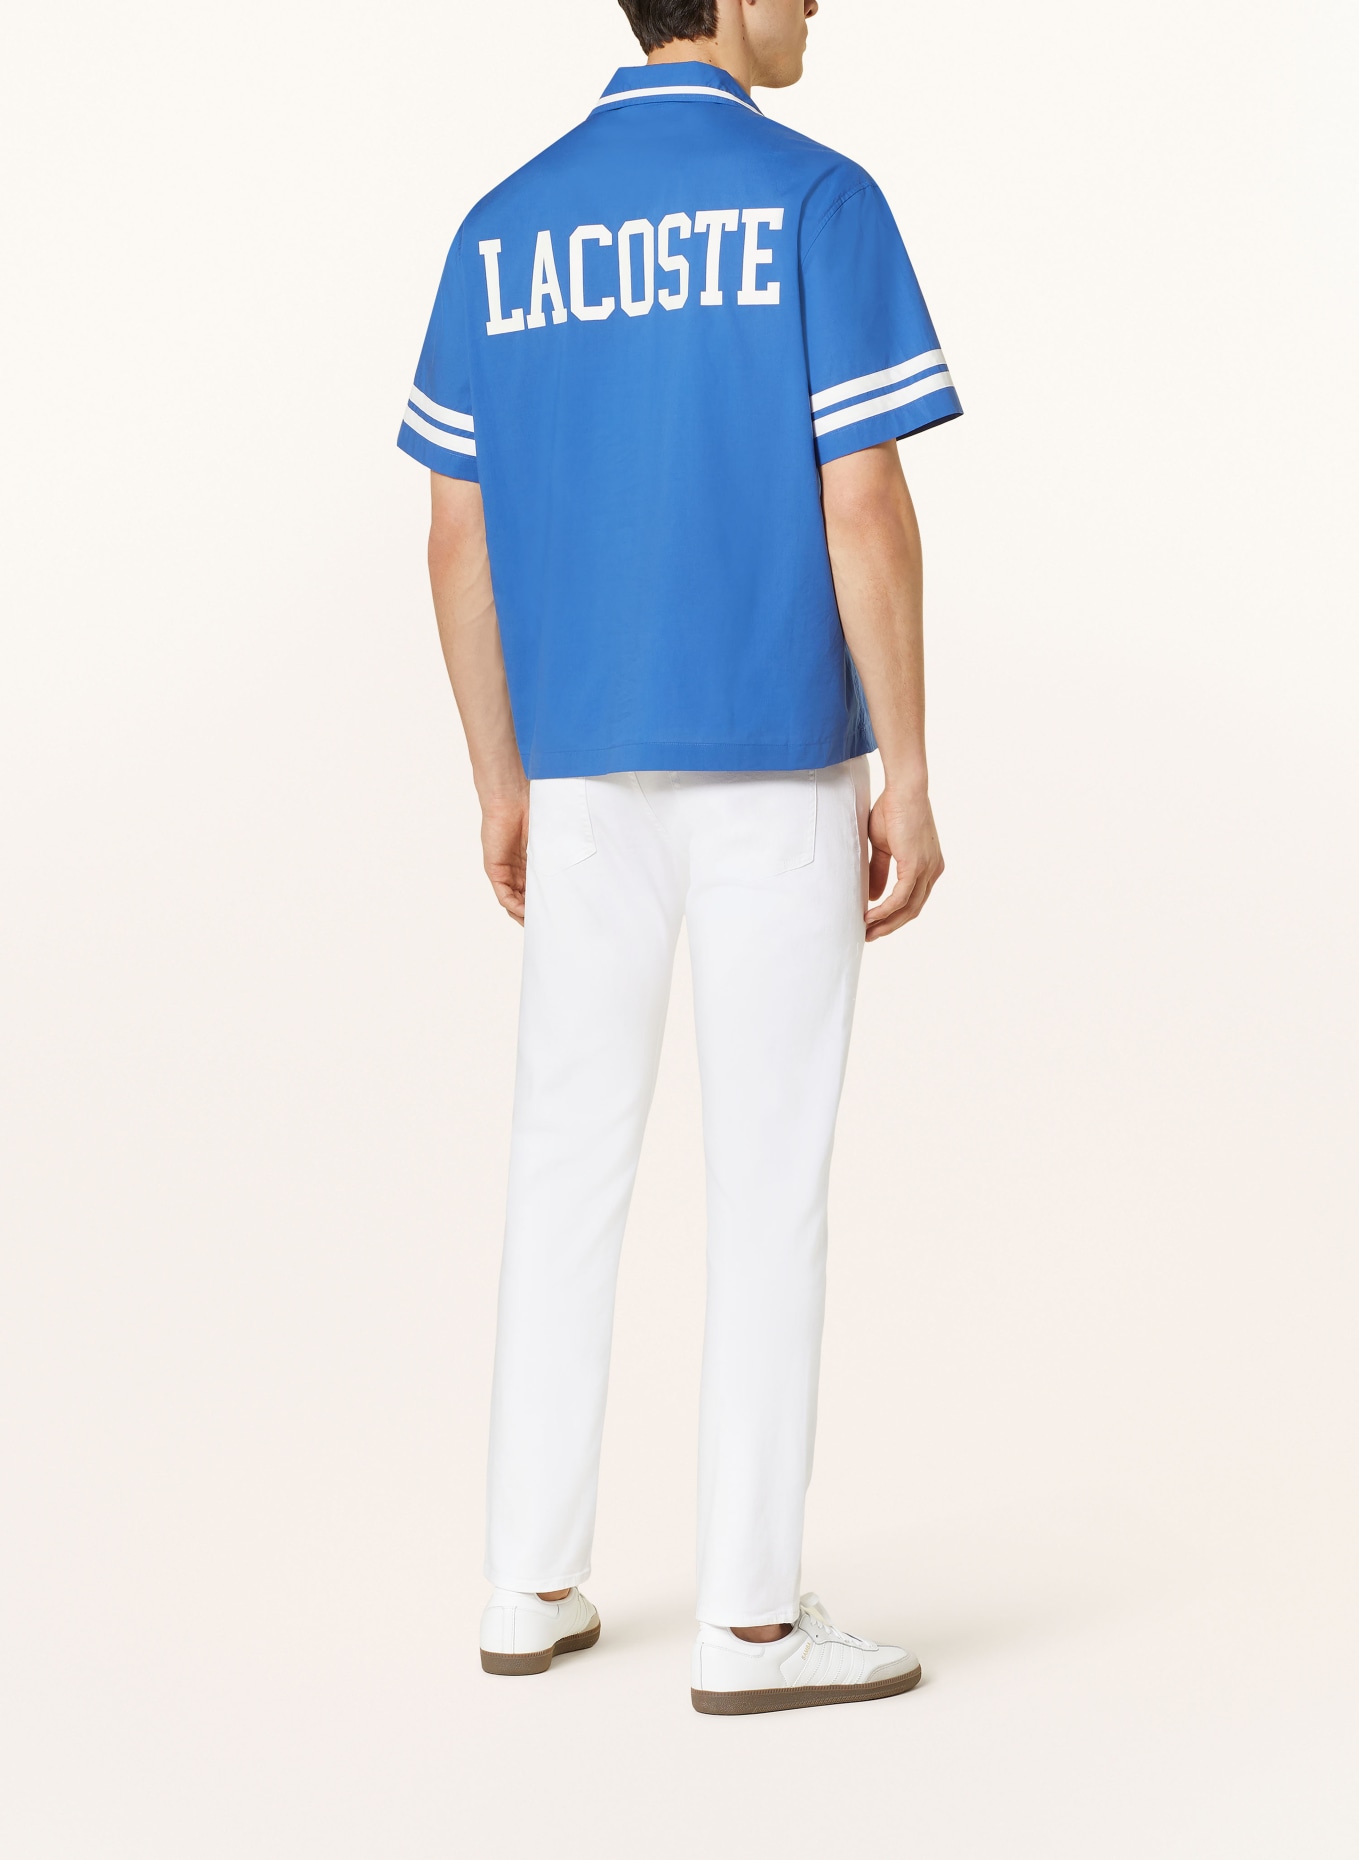 LACOSTE Resorthemd Relaxed Fit, Farbe: BLAU/ WEISS (Bild 3)